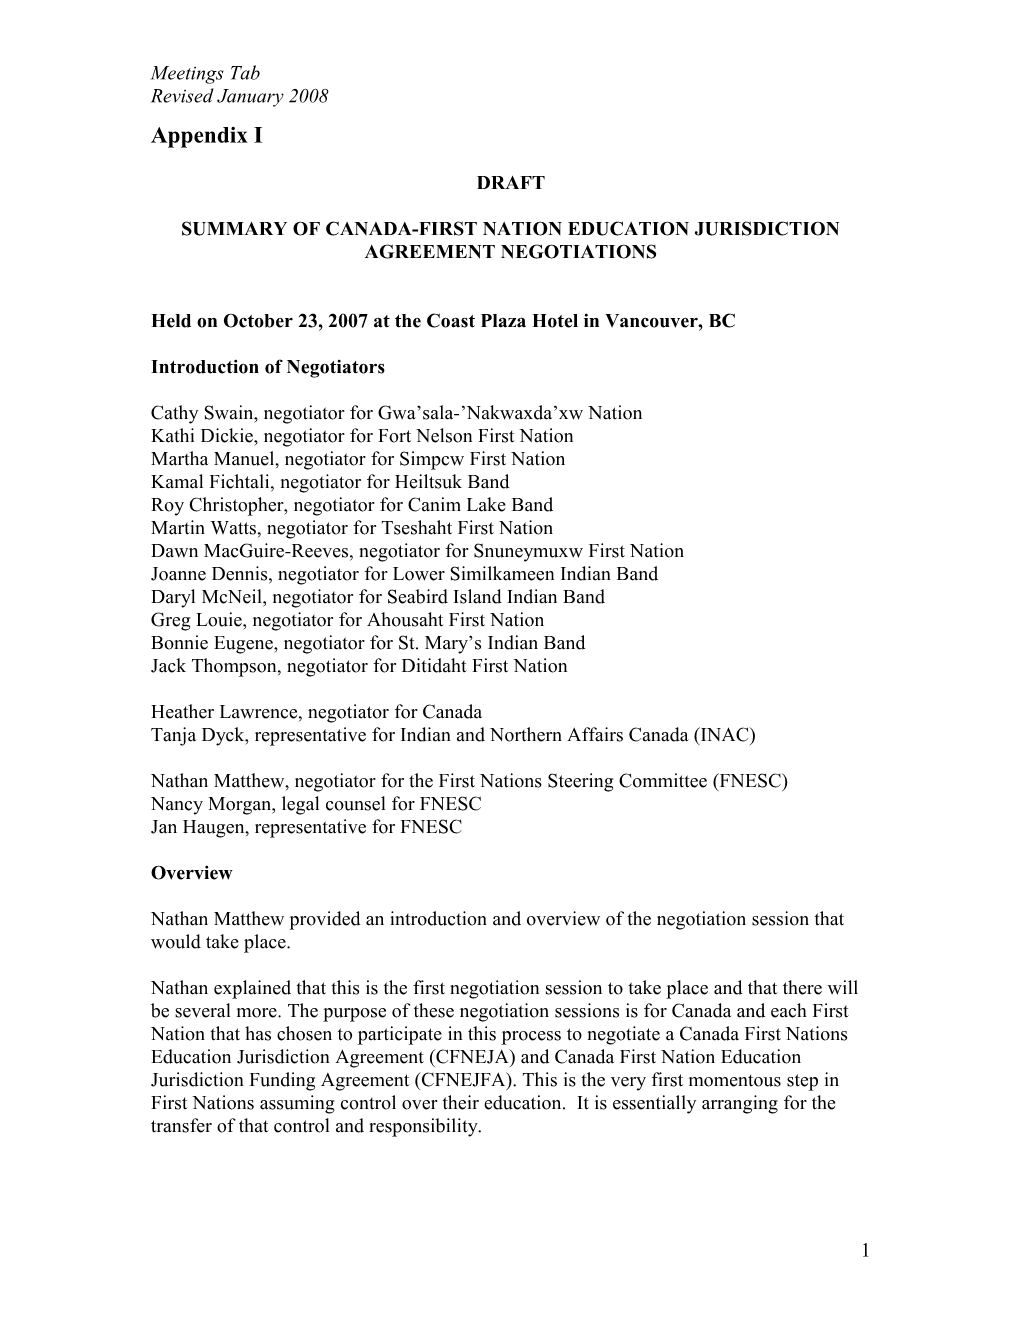 Summary of Canada-First Nation Education Jurisdiction Agreement Negotiations